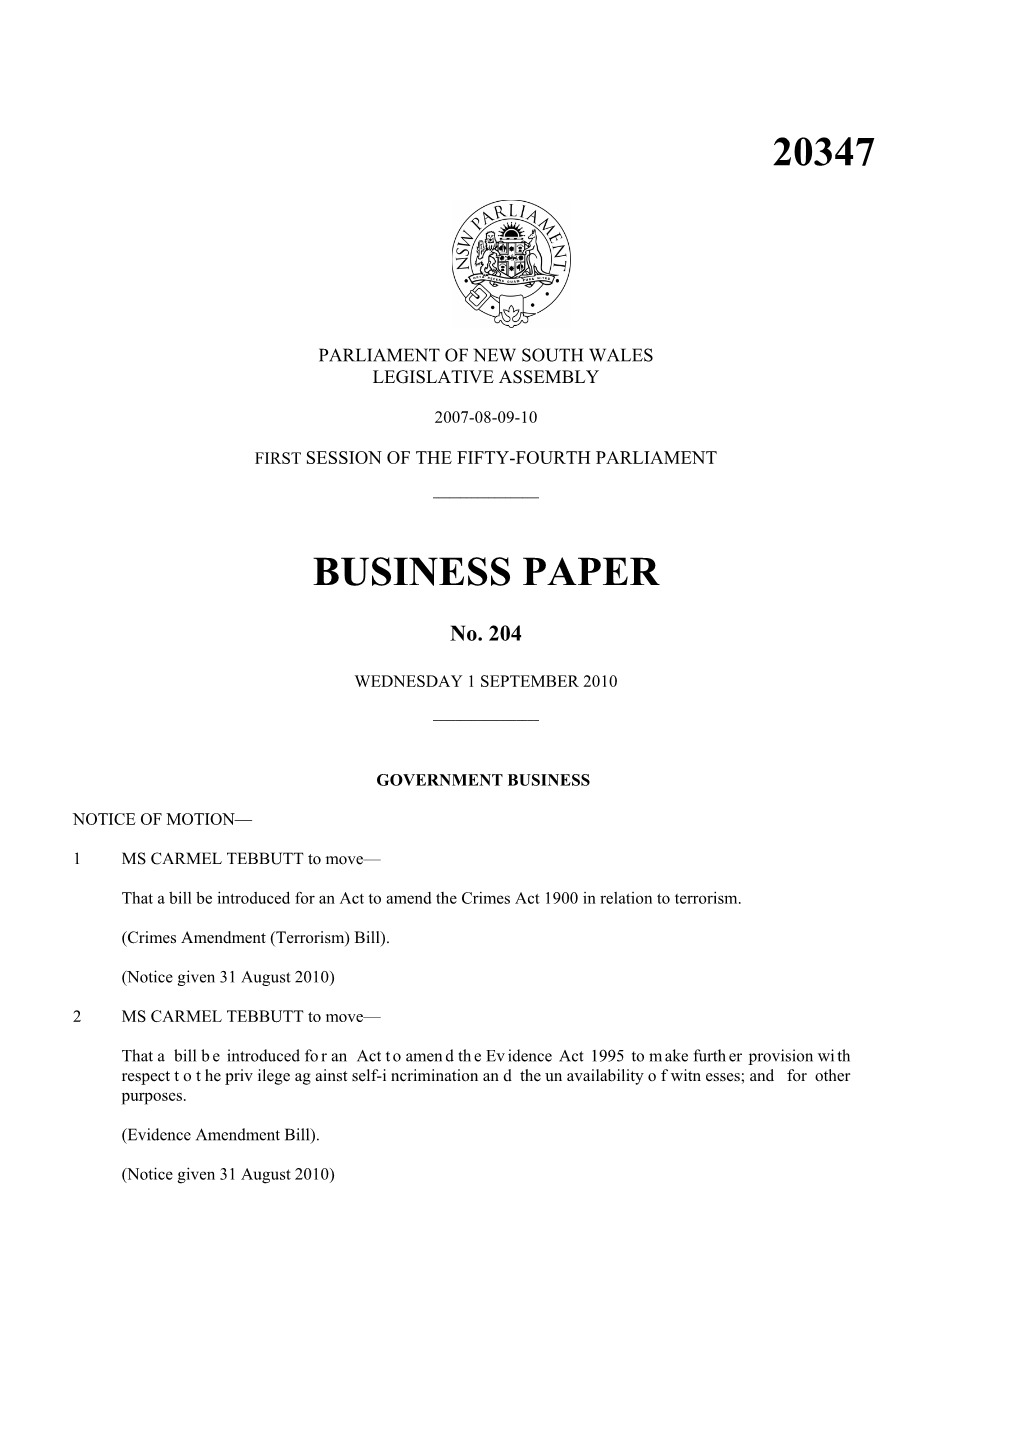 20347 Business Paper